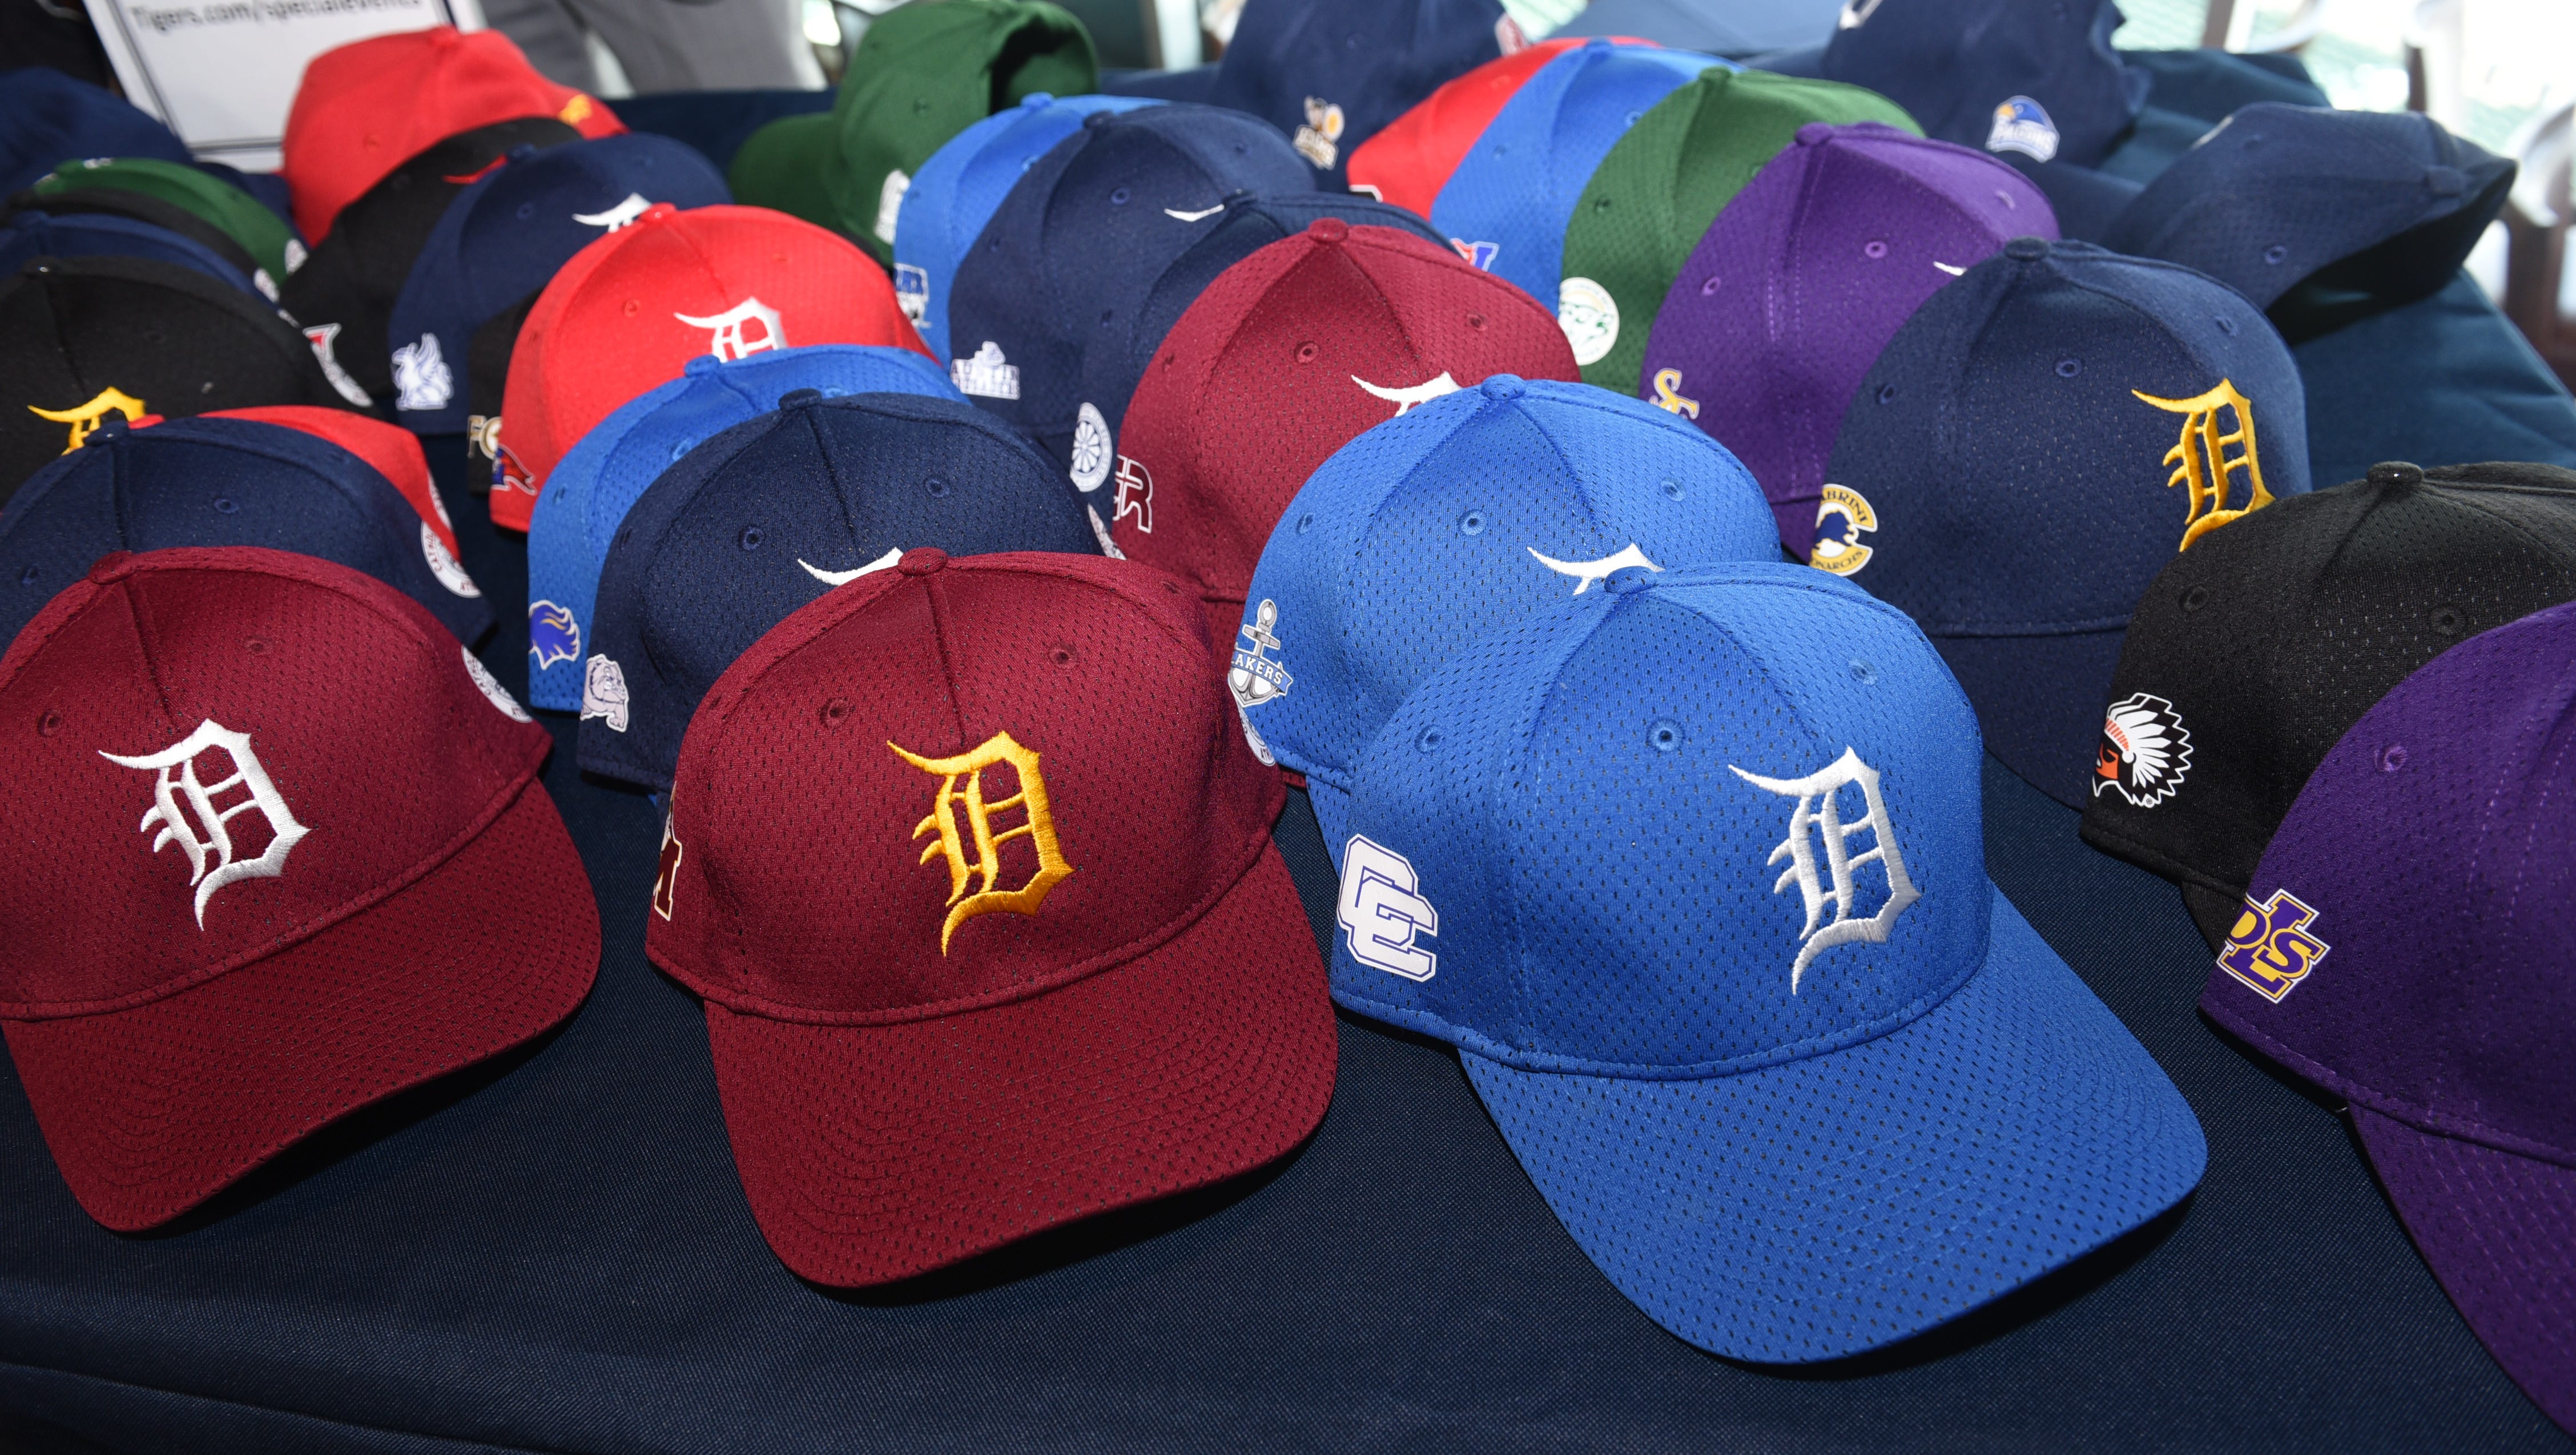 New merchandise was presented during a media event unveiling concessions.